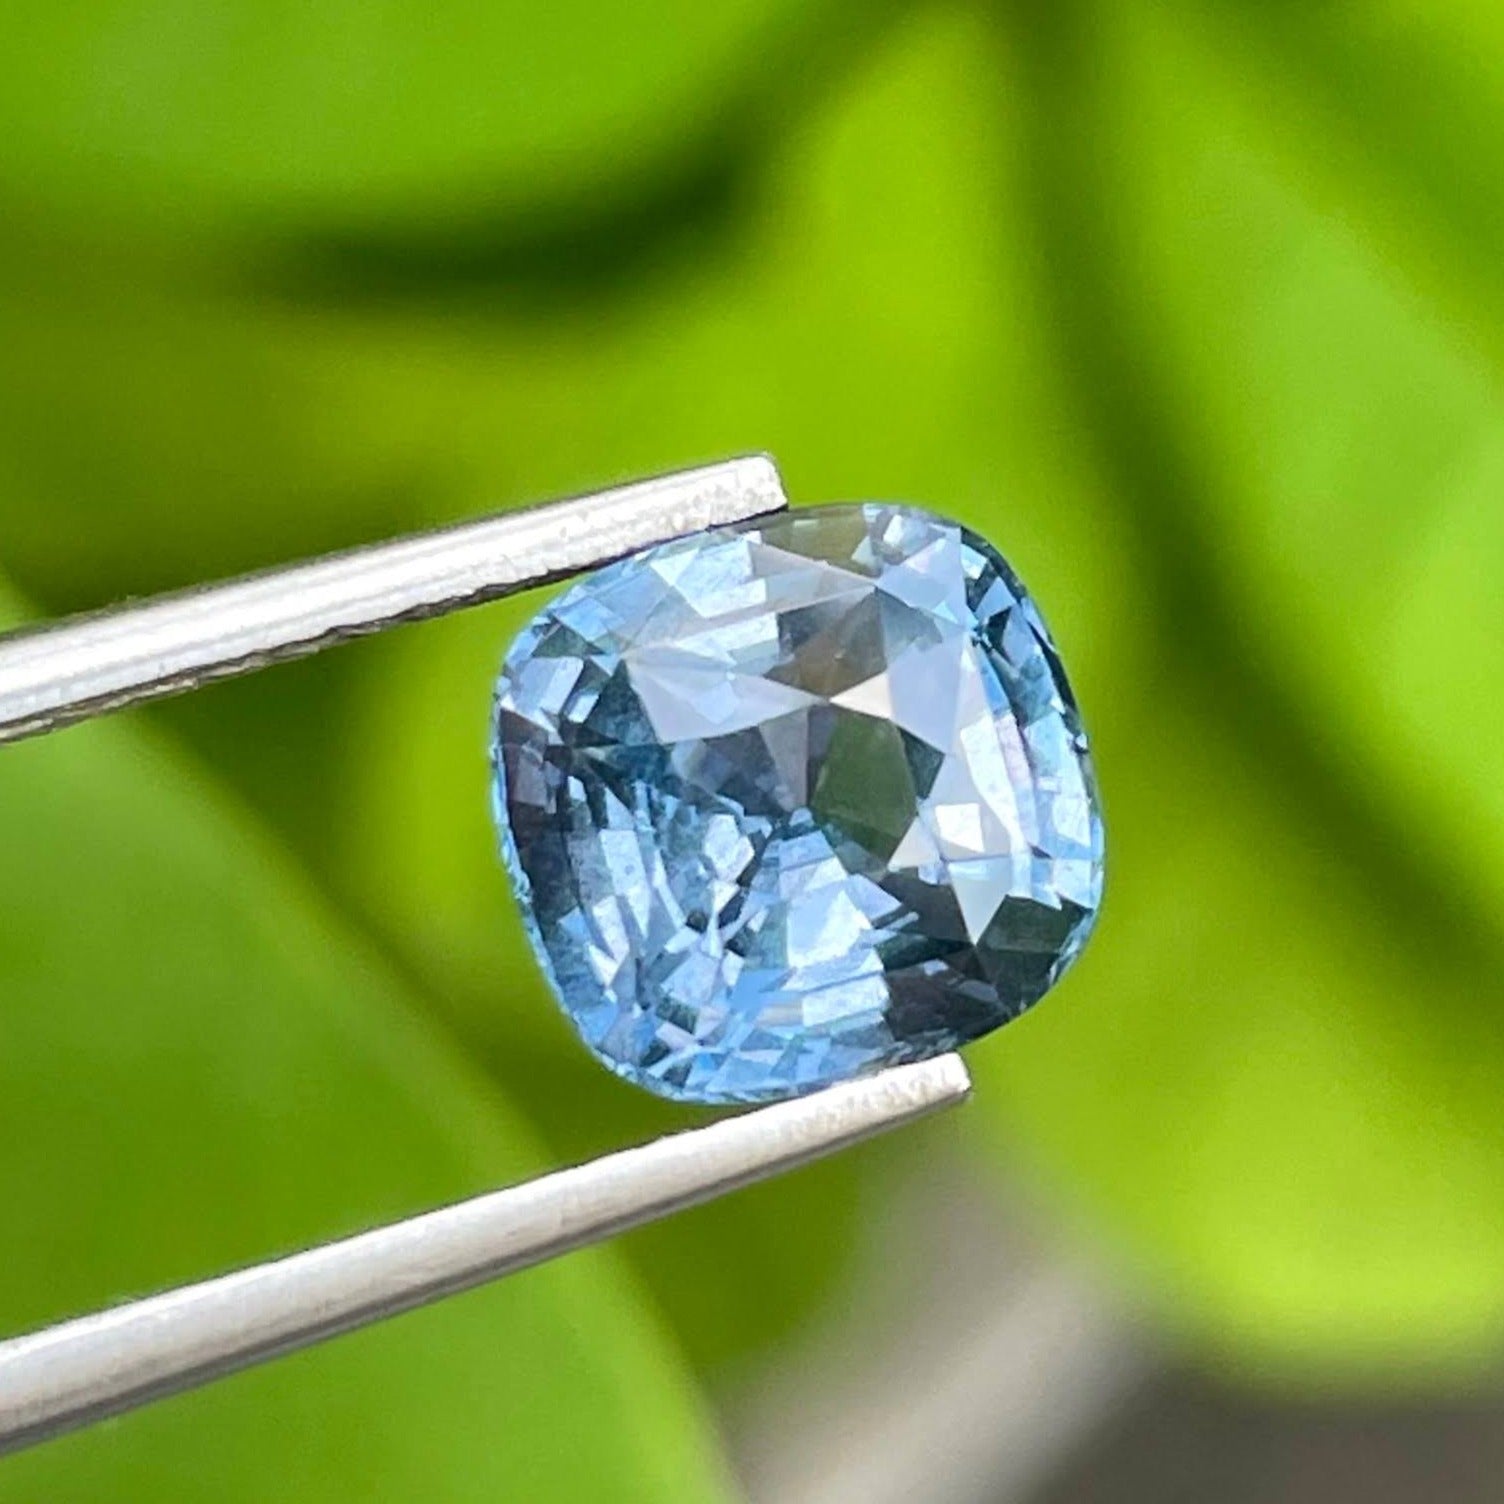 3.06 Carats Light Blue Spinel Stone